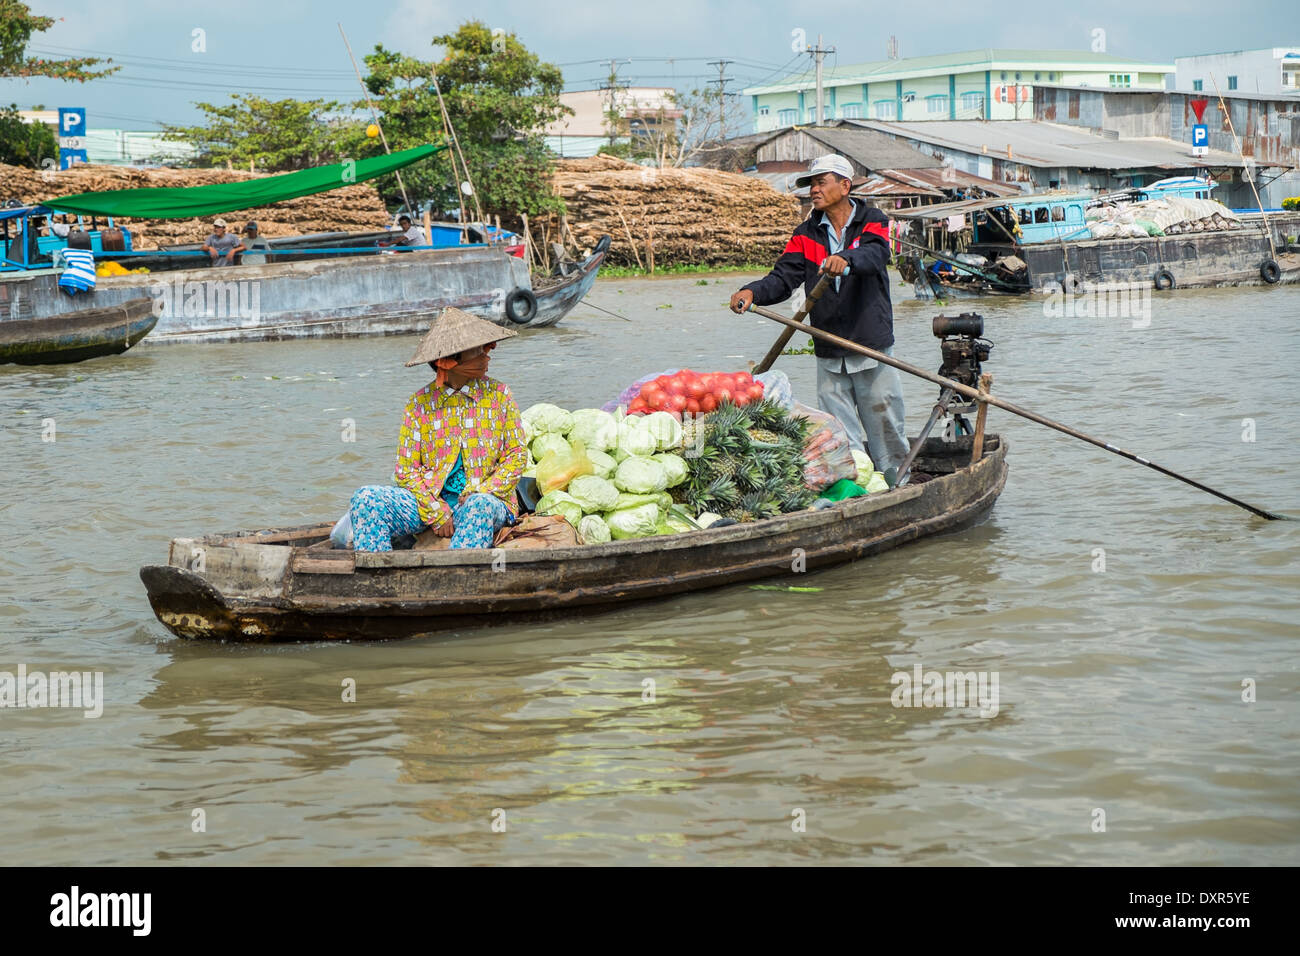 CAN THO, VIETNAM - JANUARY 26: Boat in the floating market on the Mekong river on January 26, 2014 in Can Tho, Vietnam. Stock Photo